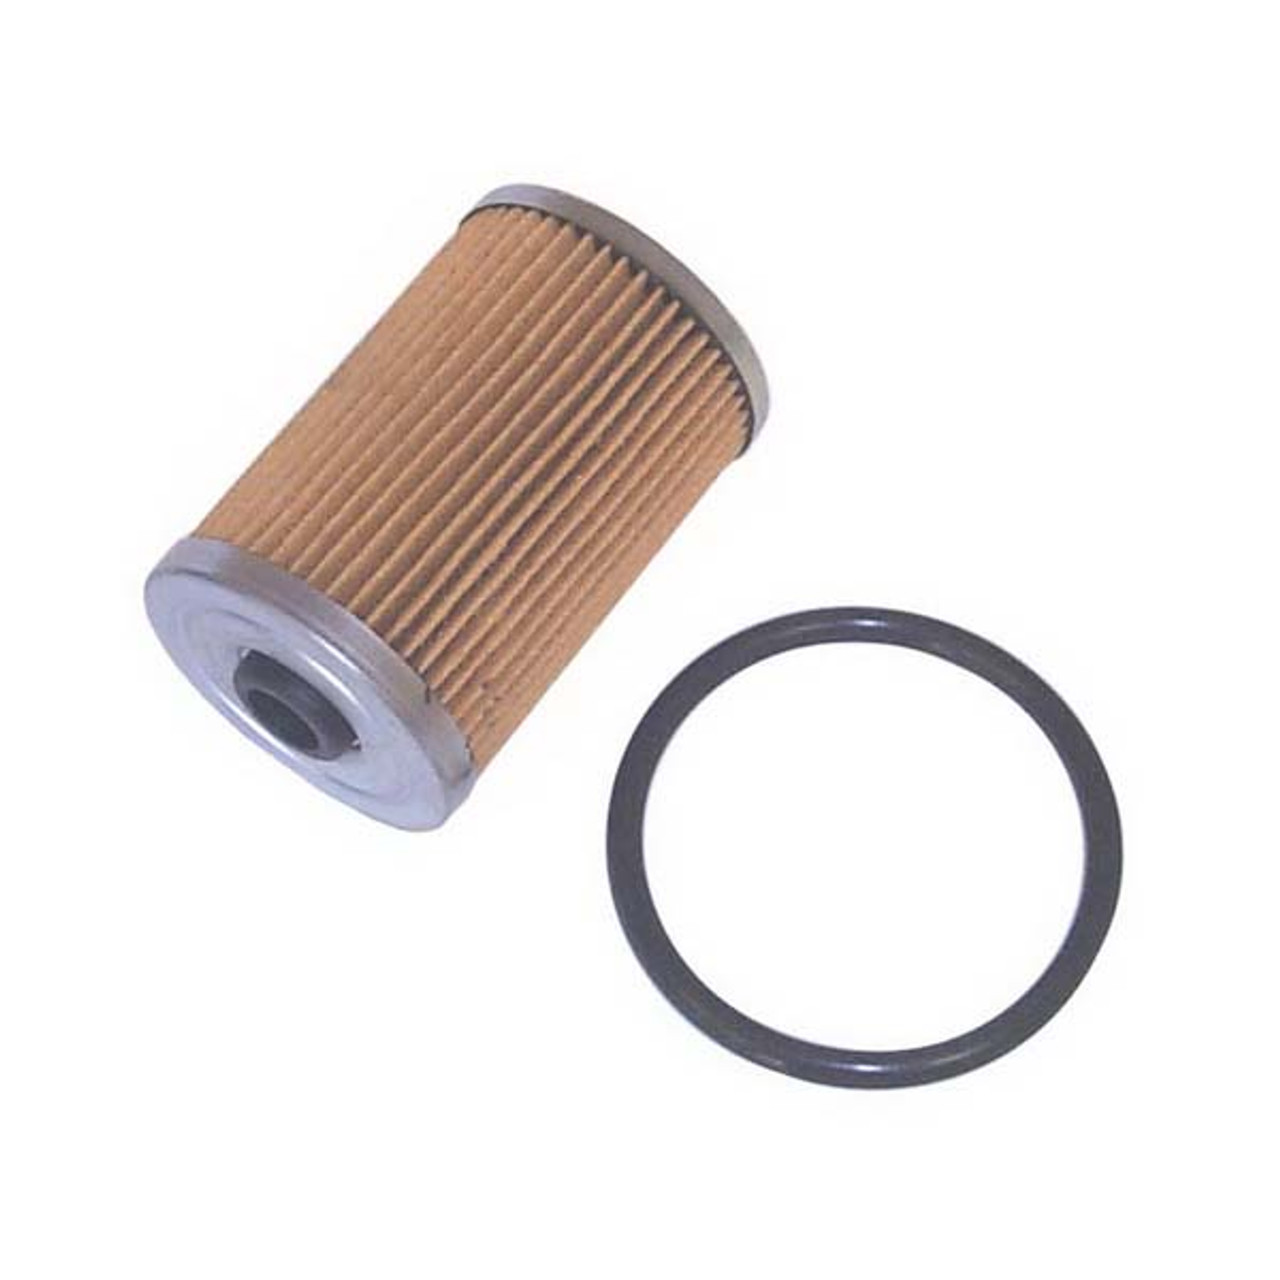 Sierra 18-7977-1 Fuel Filter Replaces 35-8M0093688